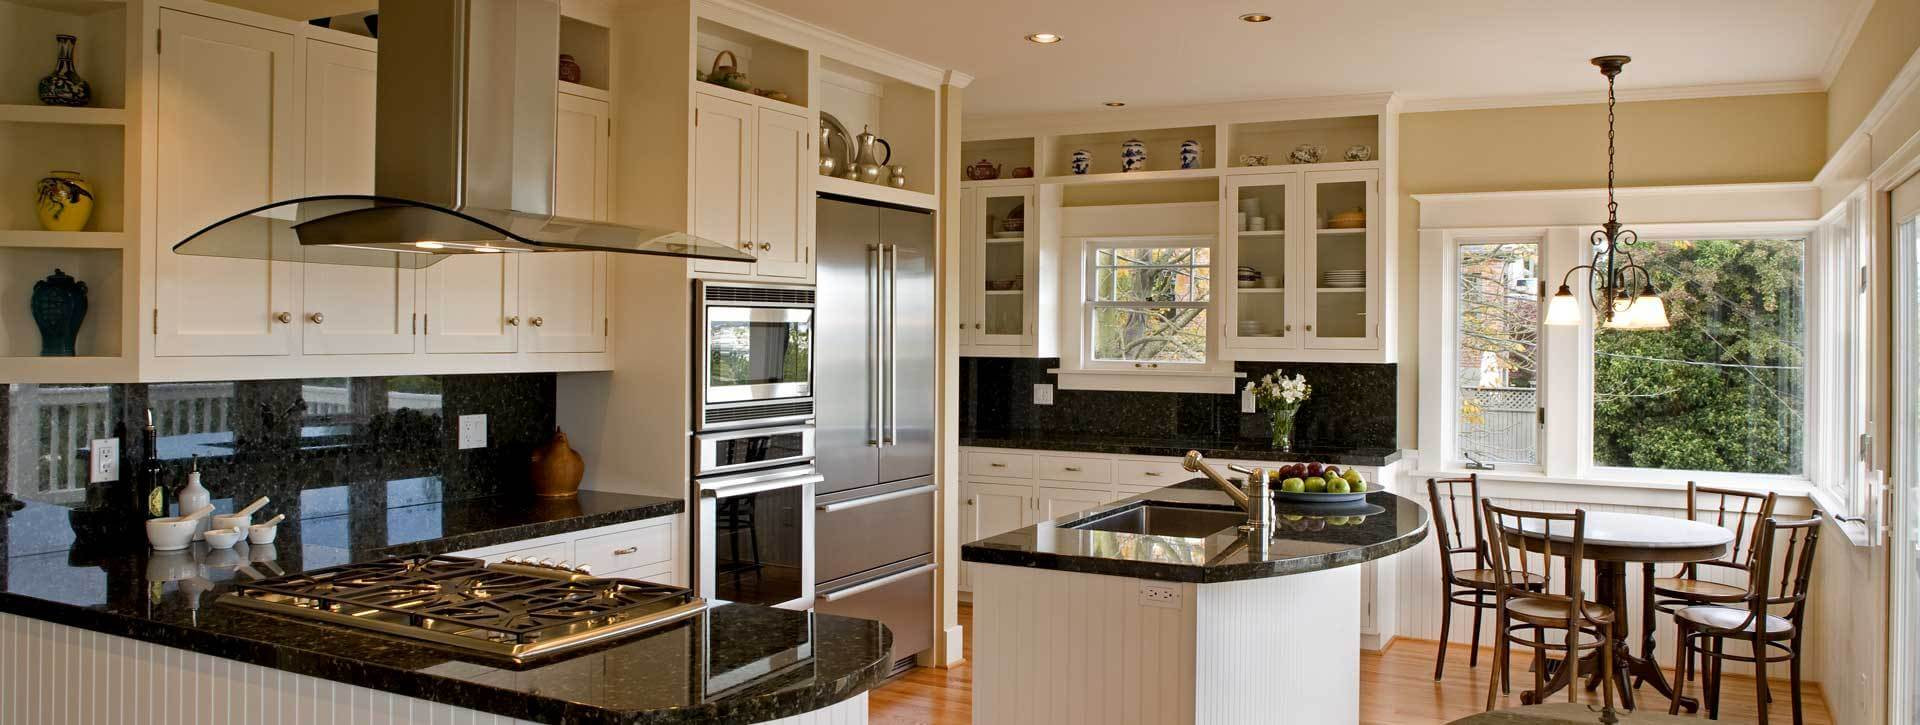 Kitchen Remodel Cost Calculator
 Kitchen Remodel Estimator to Set Your Bud